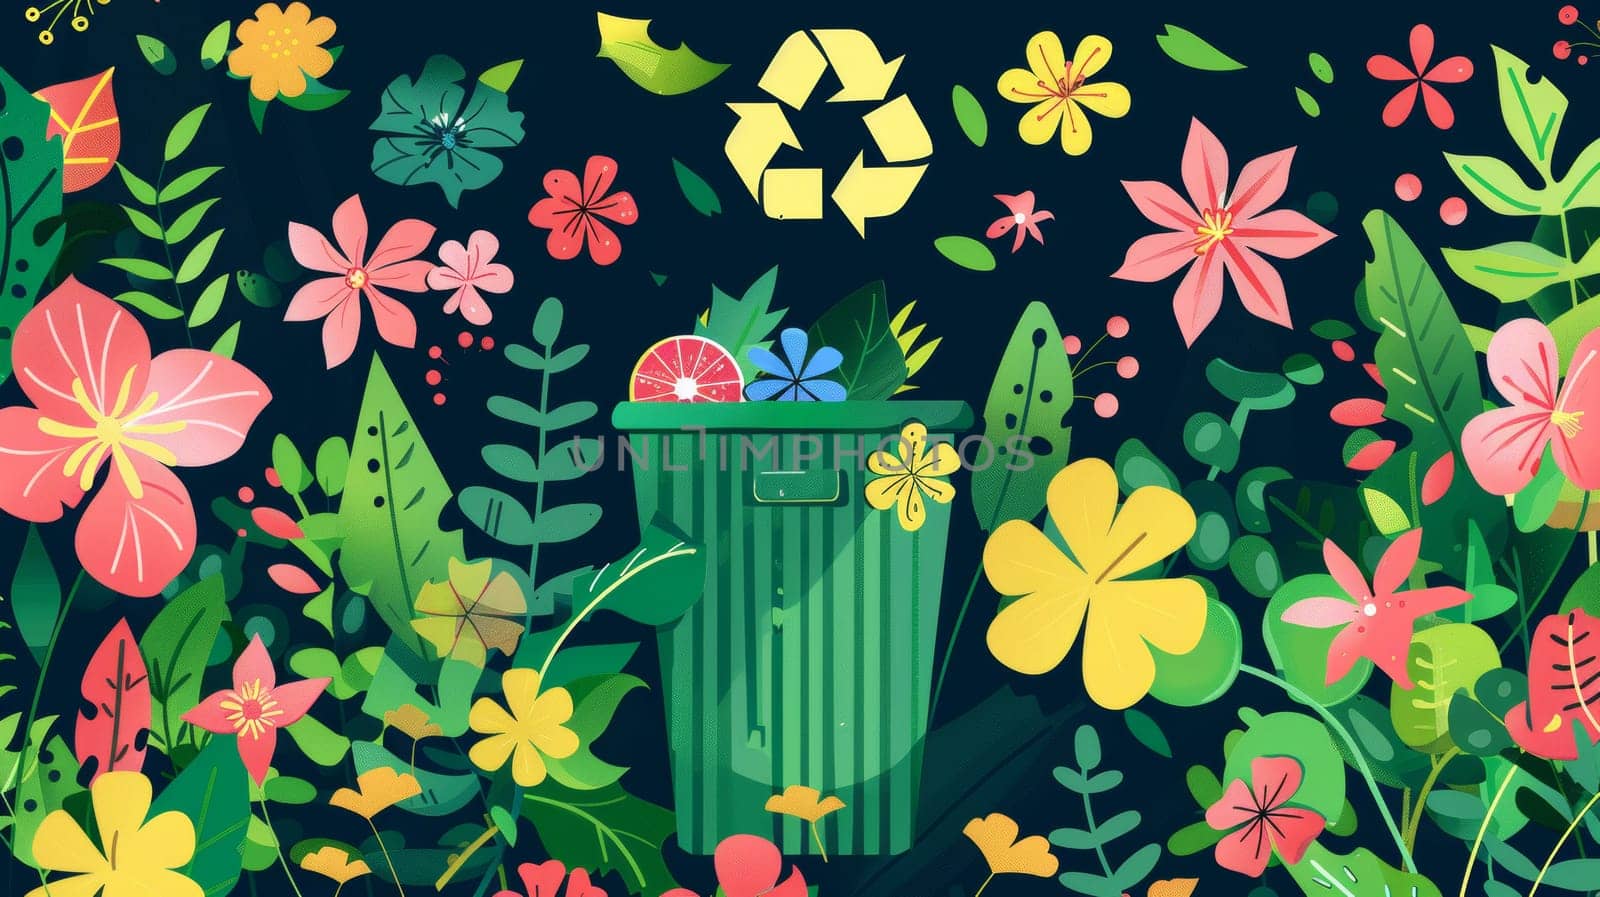 Modern background design for World Environment Day. Save the Planet, recycle bin, plant groovy style. Eco friendly illustration for web, banners, campaigns, social media posts.